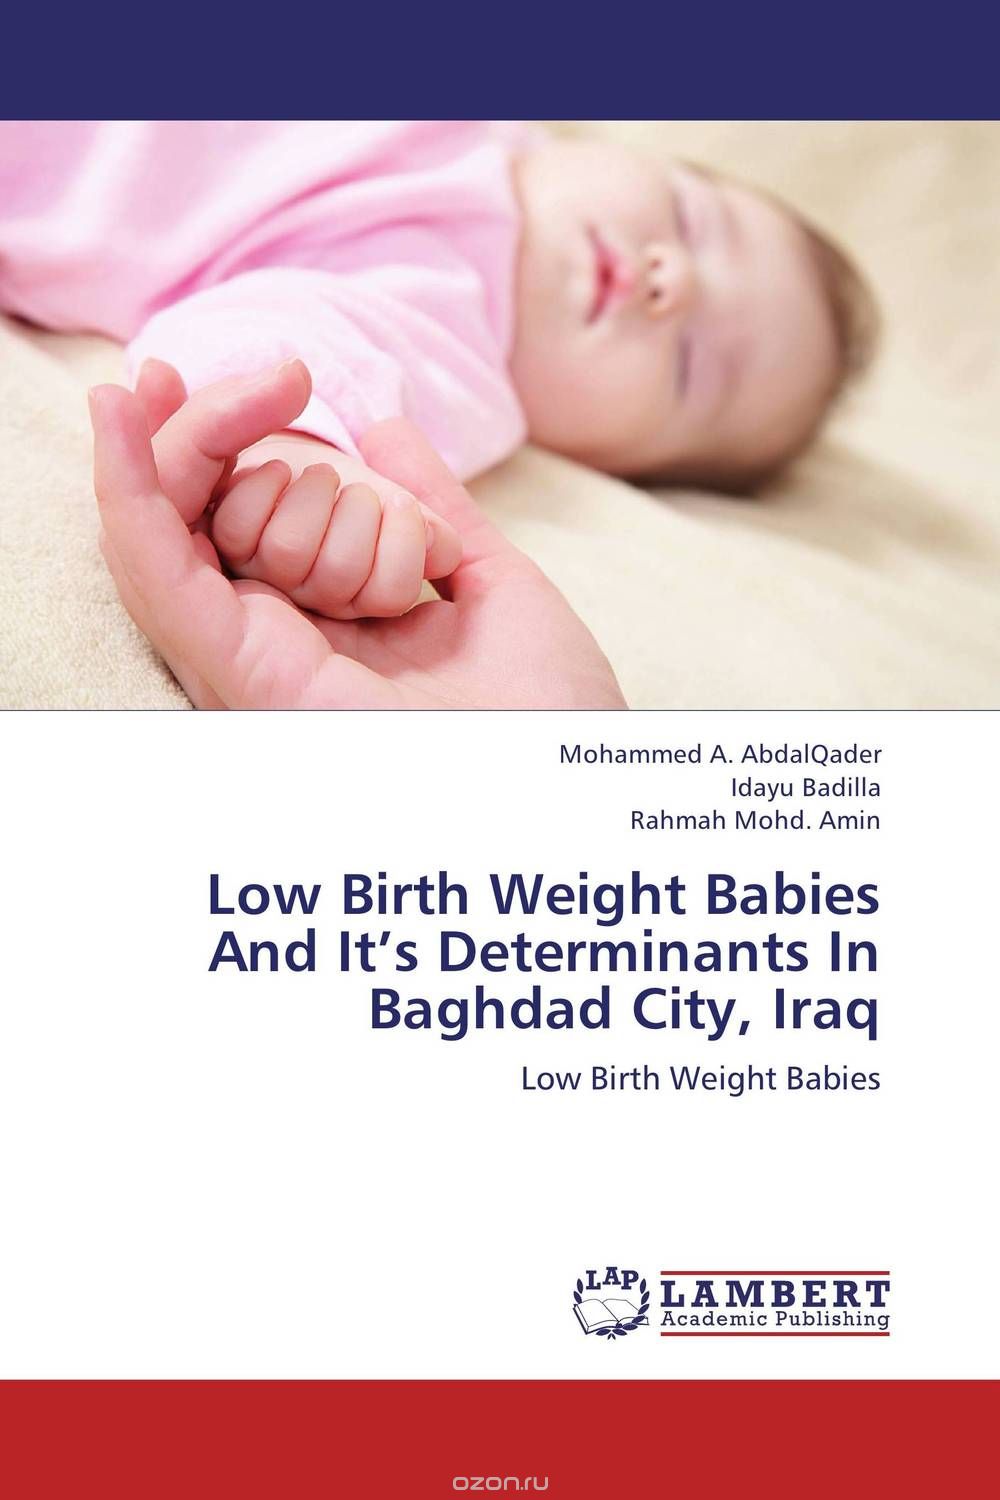 Low Birth Weight Babies And It’s Determinants In Baghdad City, Iraq